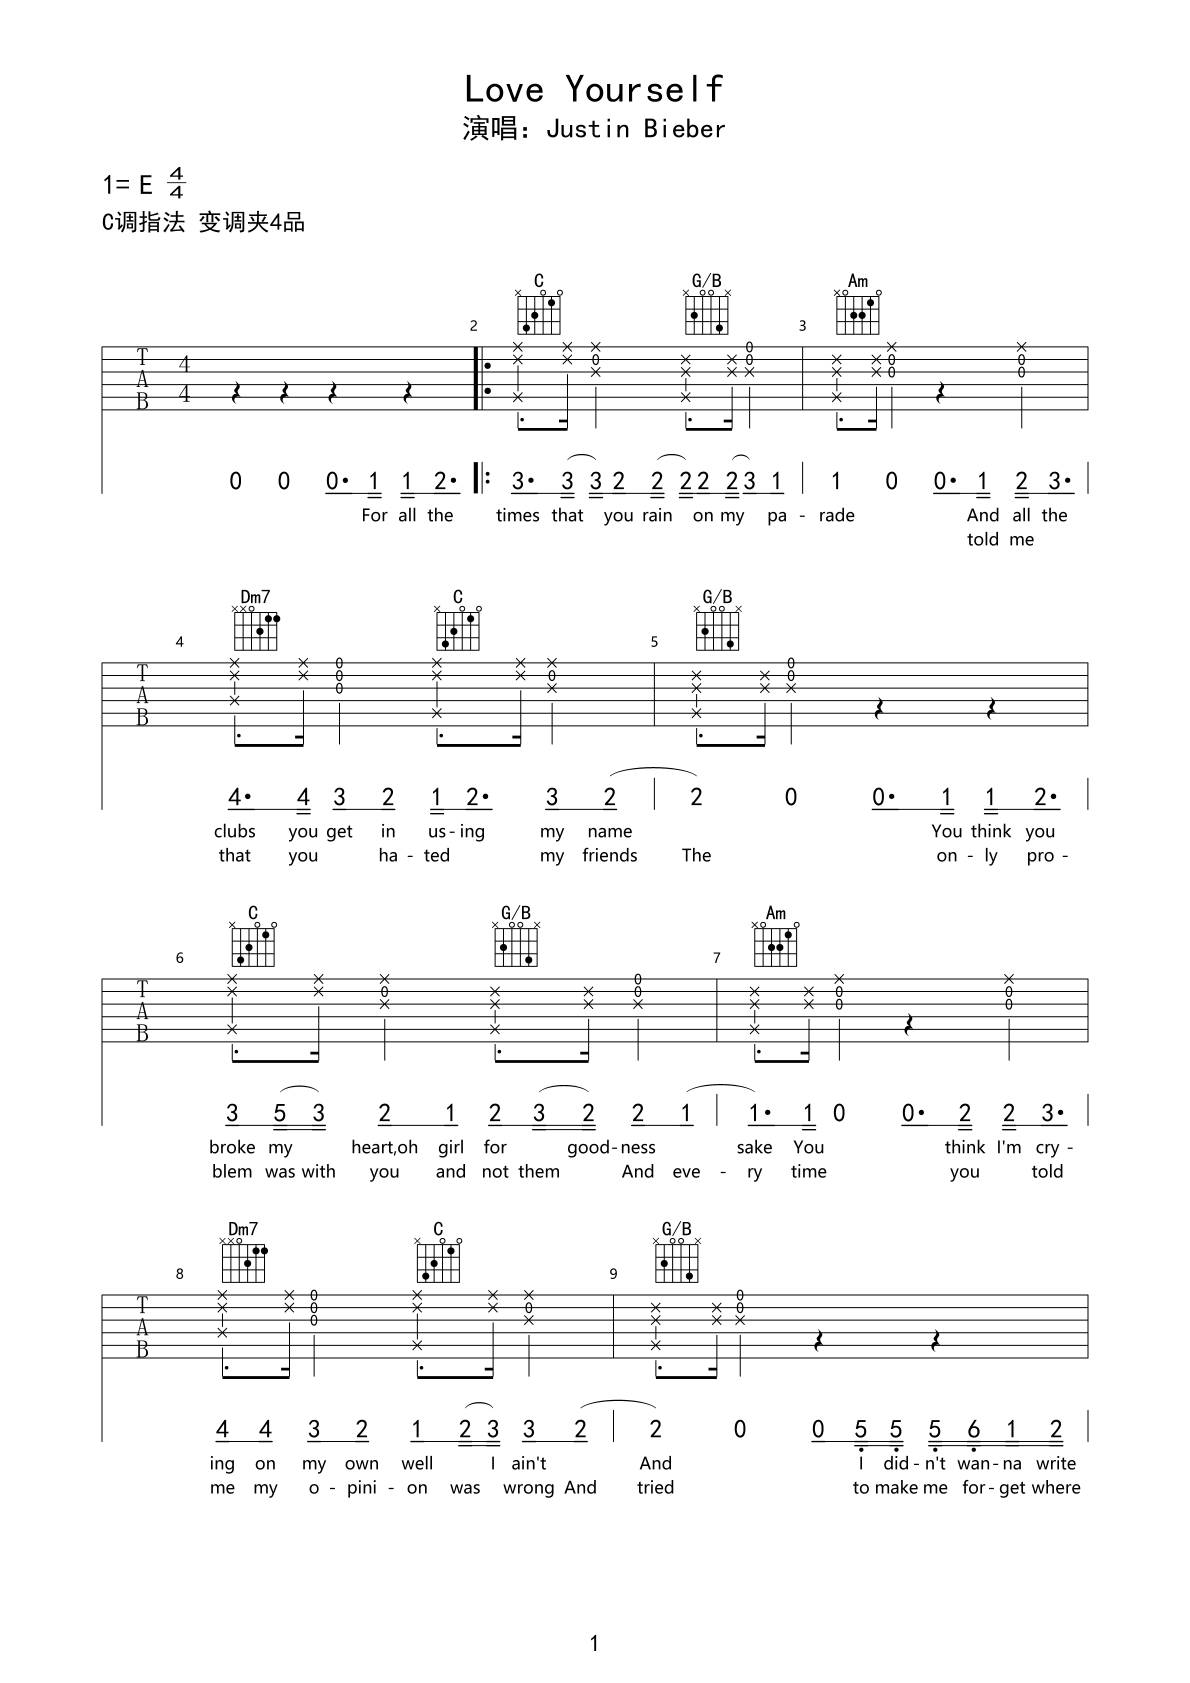 Justin Bieber "Love Yourself" Sheet Music Notes | Download Printable ...